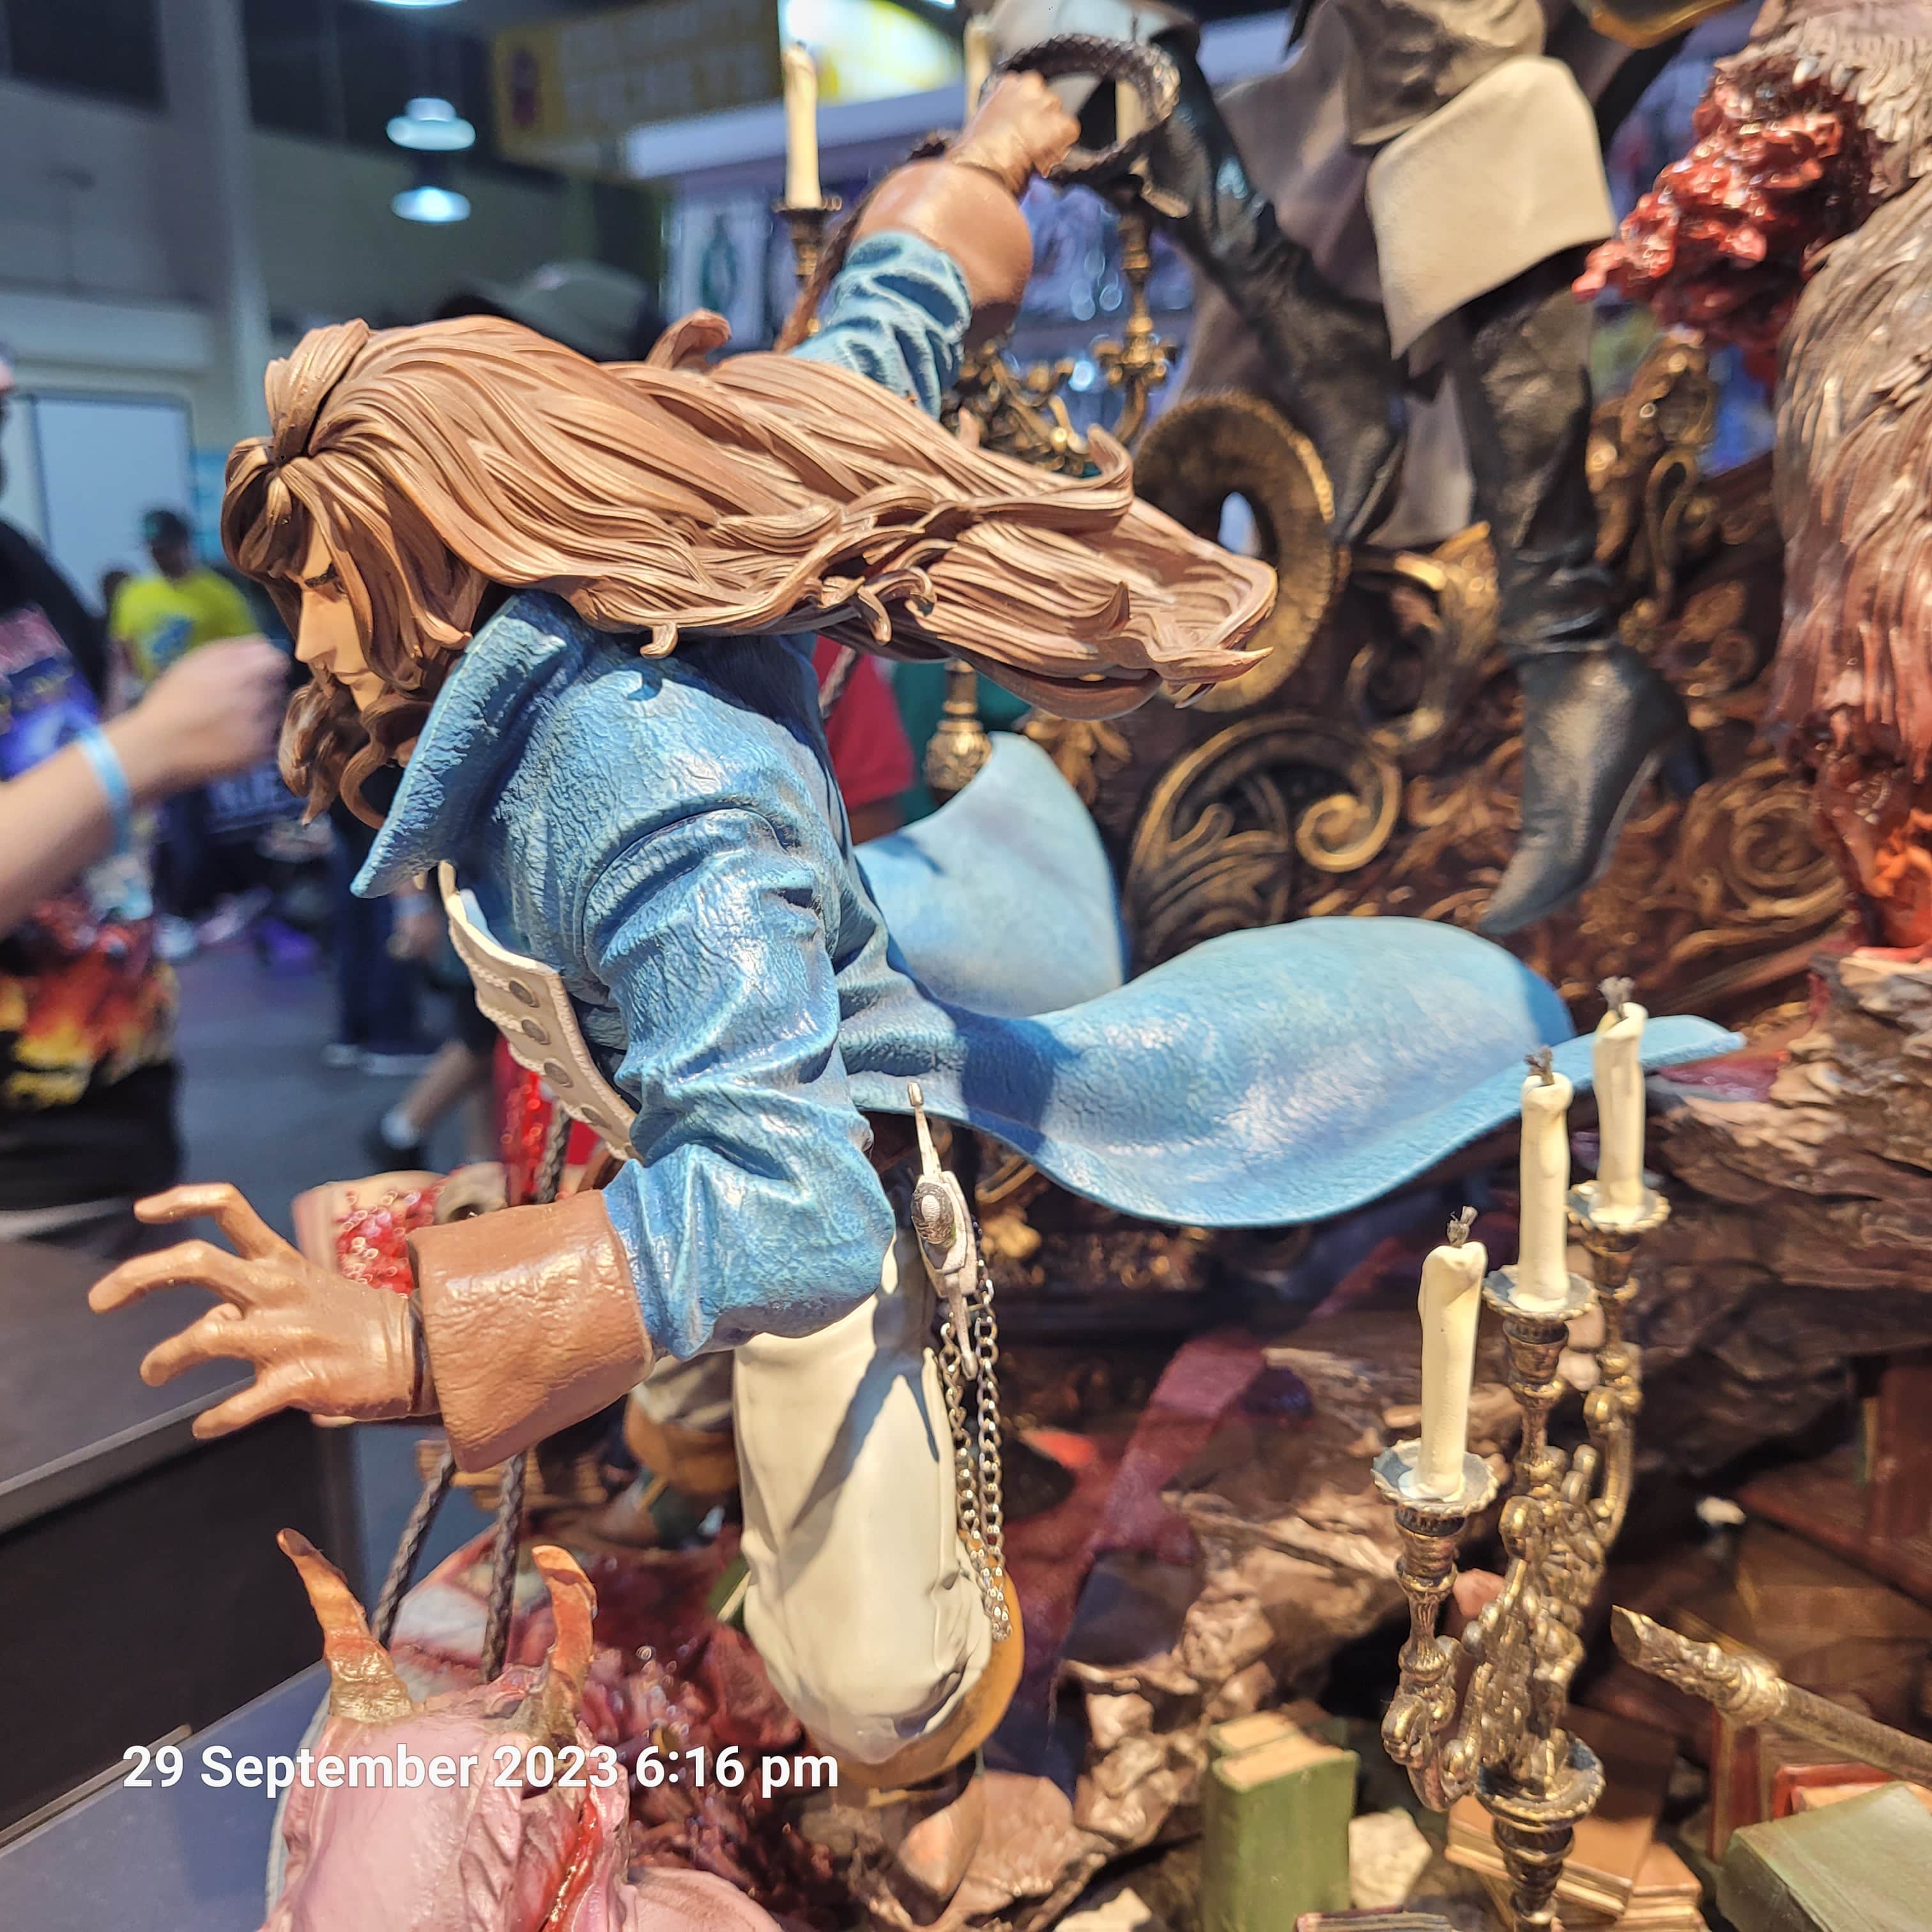 Castlevania - Alucard And Richter-gaming statues-Flexible Plan for Twelve Months Resin Figures Figurama Collectors 